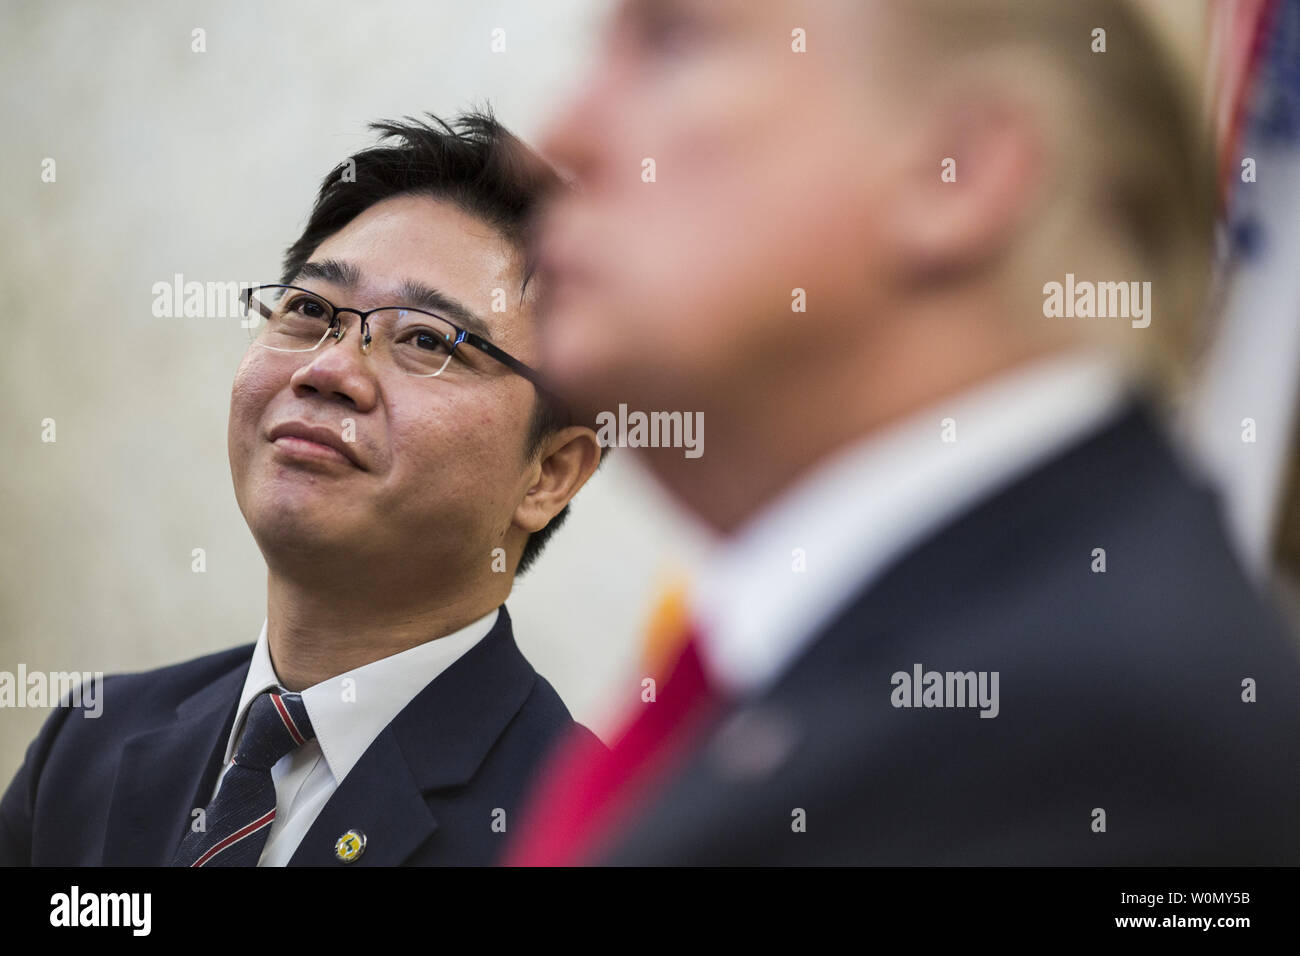 North Korean defector Ji Seong-ho (L) listens as U.S. President Donald Trump meets with North Korean defectors in the Oval Office of the White House in Washington, D.C. on February  2, 2018. Trump's meeting is one week before the Winter Olympics in Pyeongchang, South Korea, in which North Korea will be participating.    Photo by Zach Gibson/UPI Stock Photo